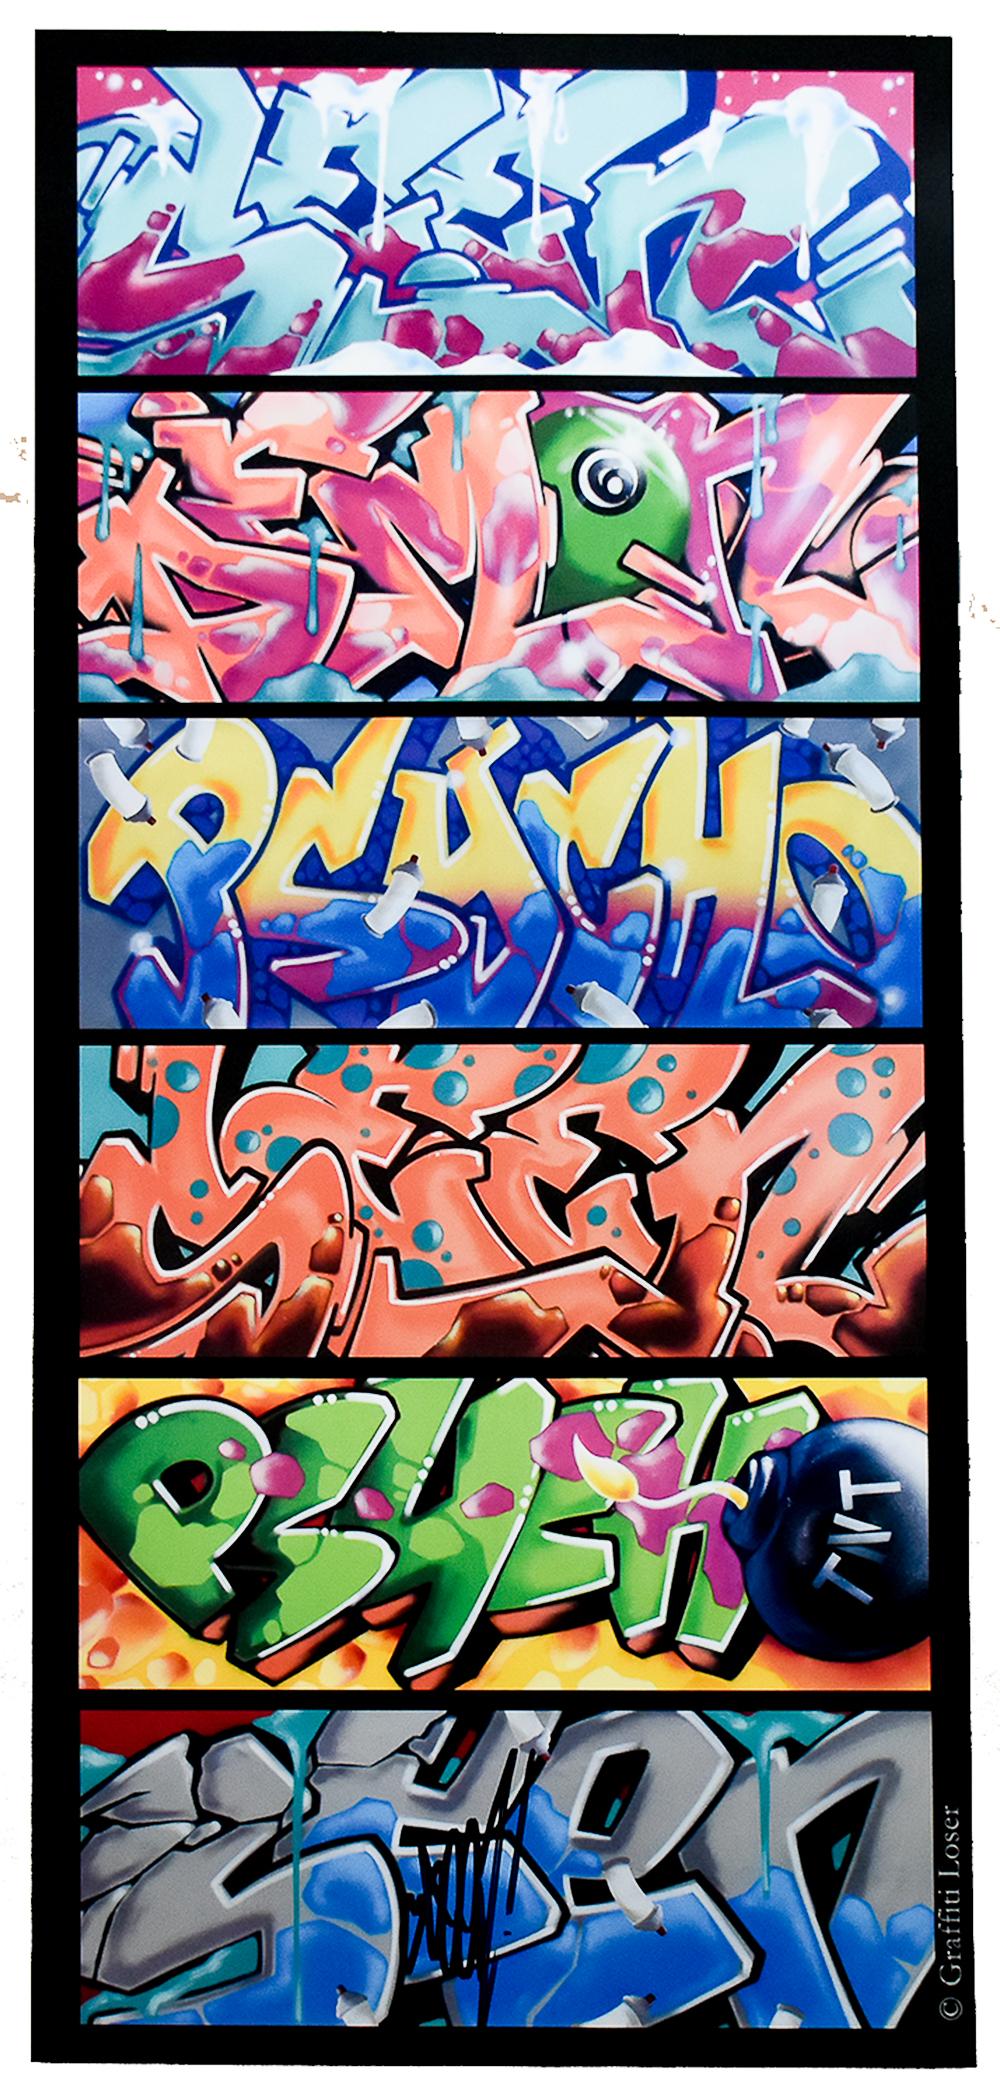 SEEN Graffiti Mix (Volume 2 Signed Poster) - Print by Seen